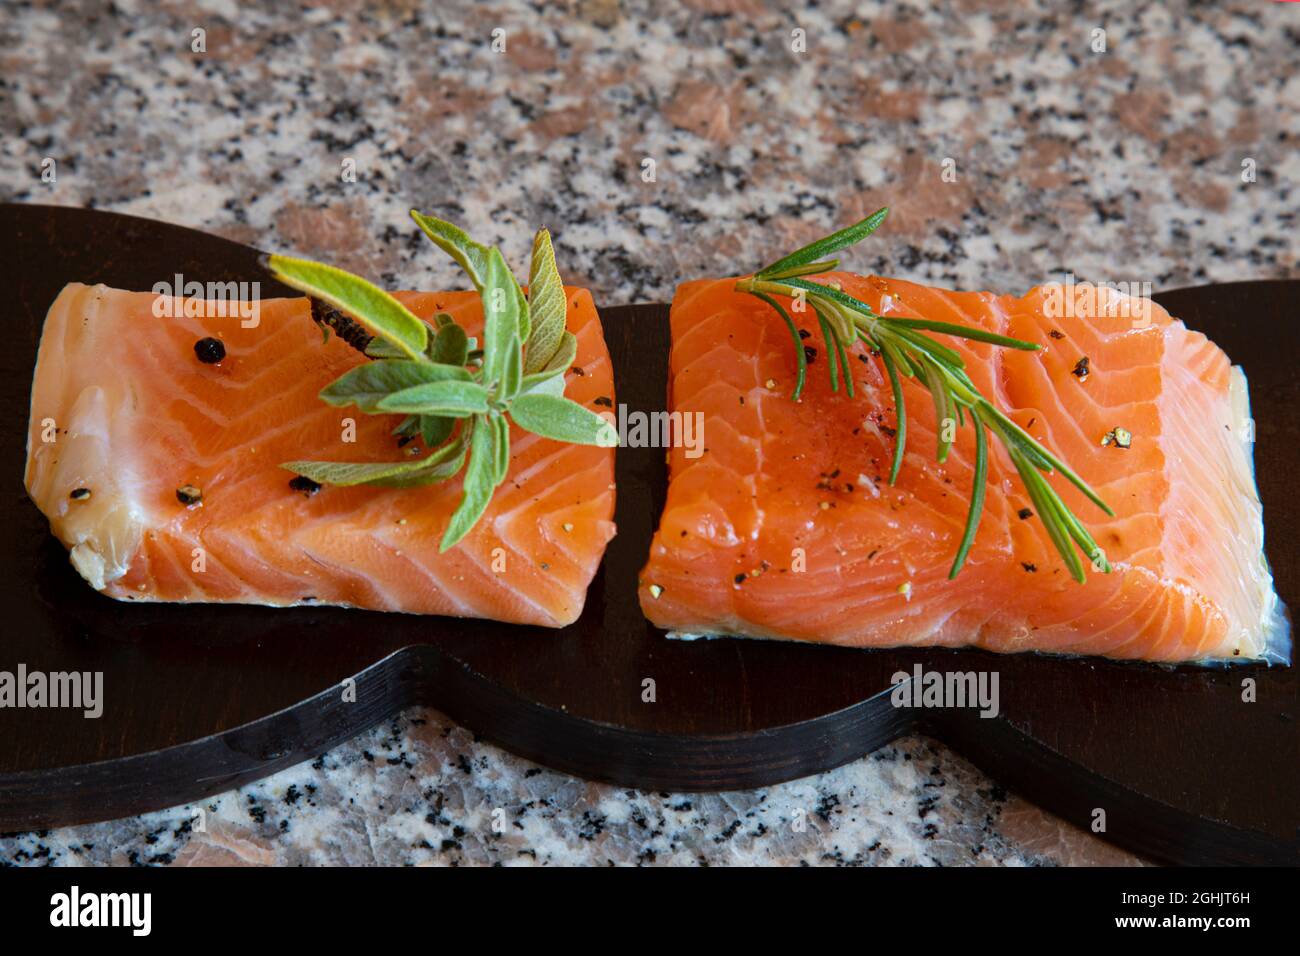 pieces of pickled salmon on a wooden board on a marble background, decorated with sage and rosemary leaves Stock Photo